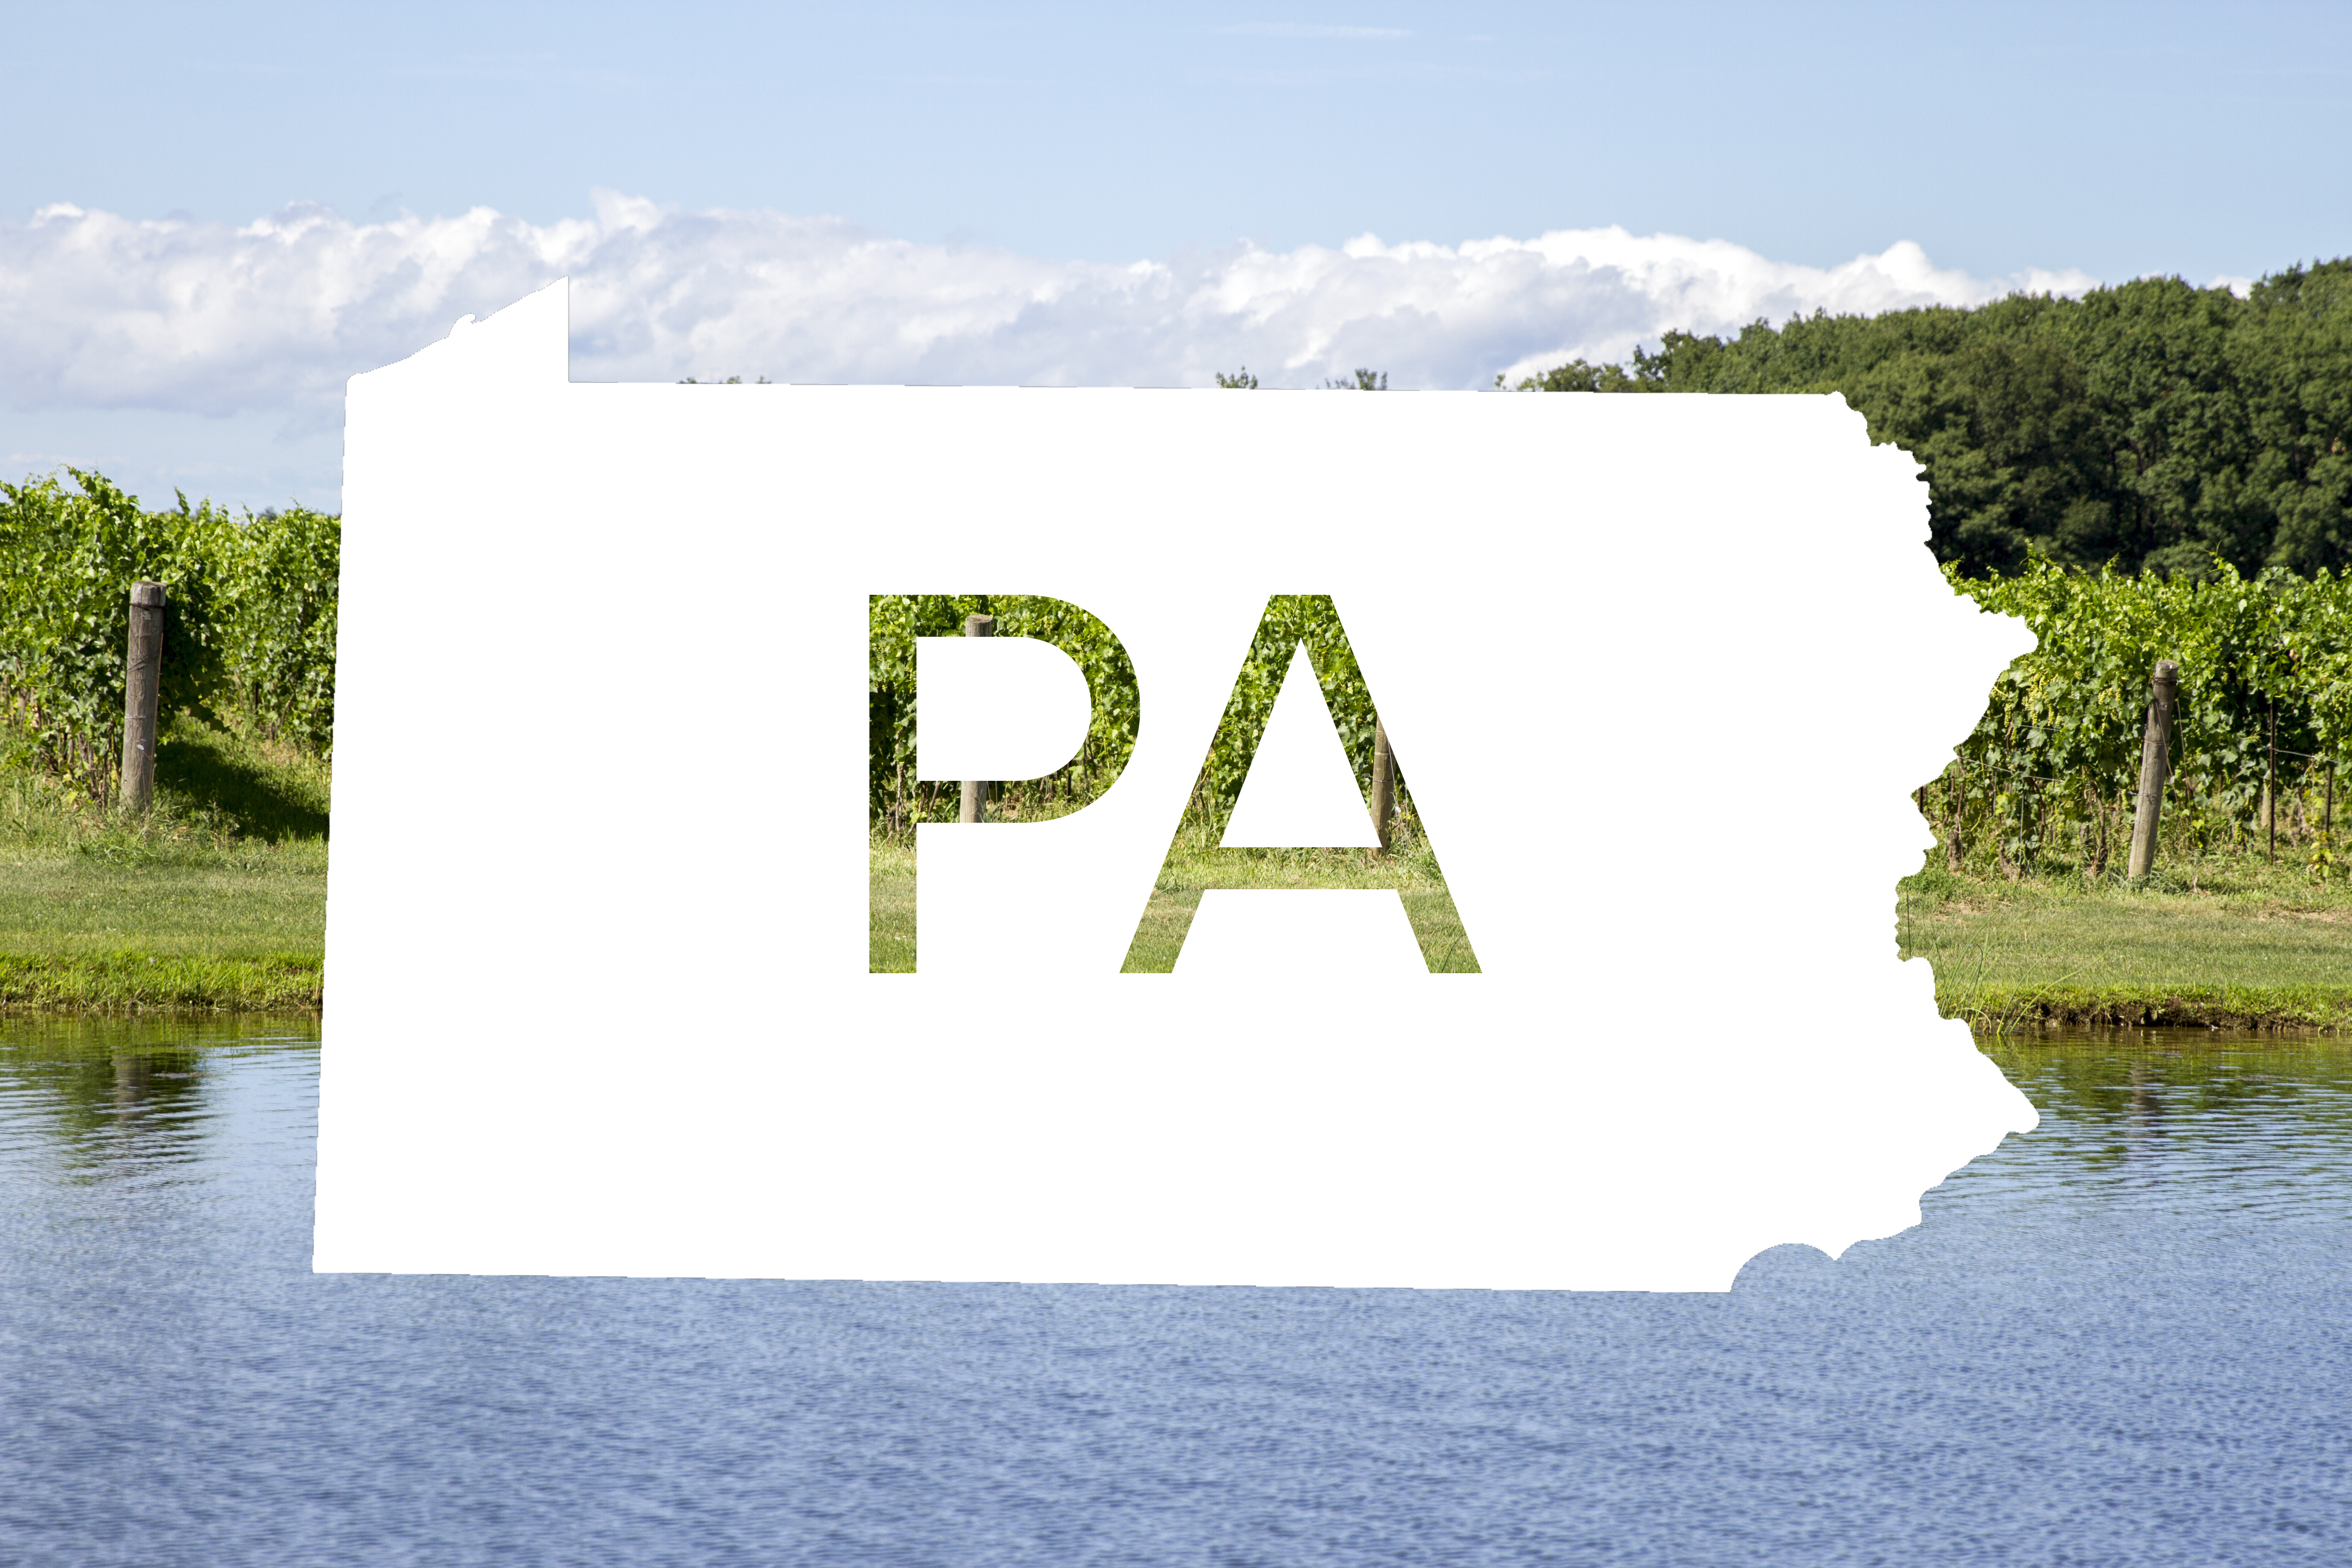 Silhouette of Pennsylvania state with "PA" on it, overlaid on a Pennsylvania winegrowing region